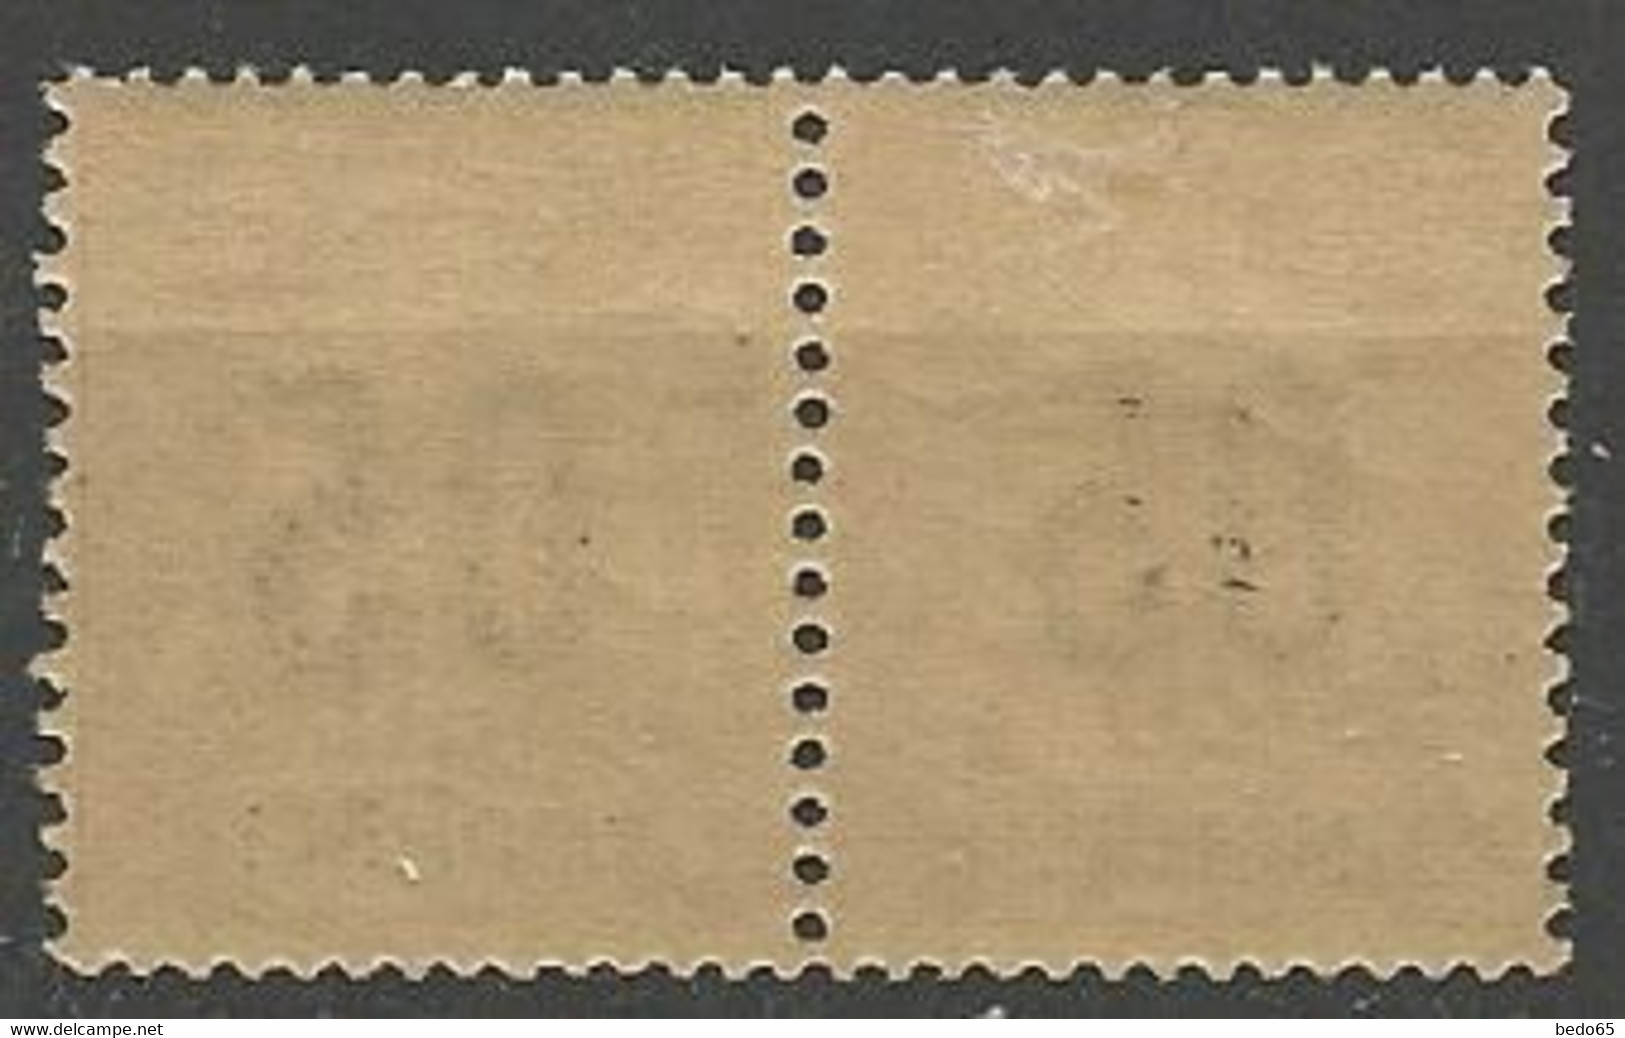 MOHELI N° 18Aa Tenant à Normal NEUF* TRACE DE CHARNIERE / MH - Unused Stamps